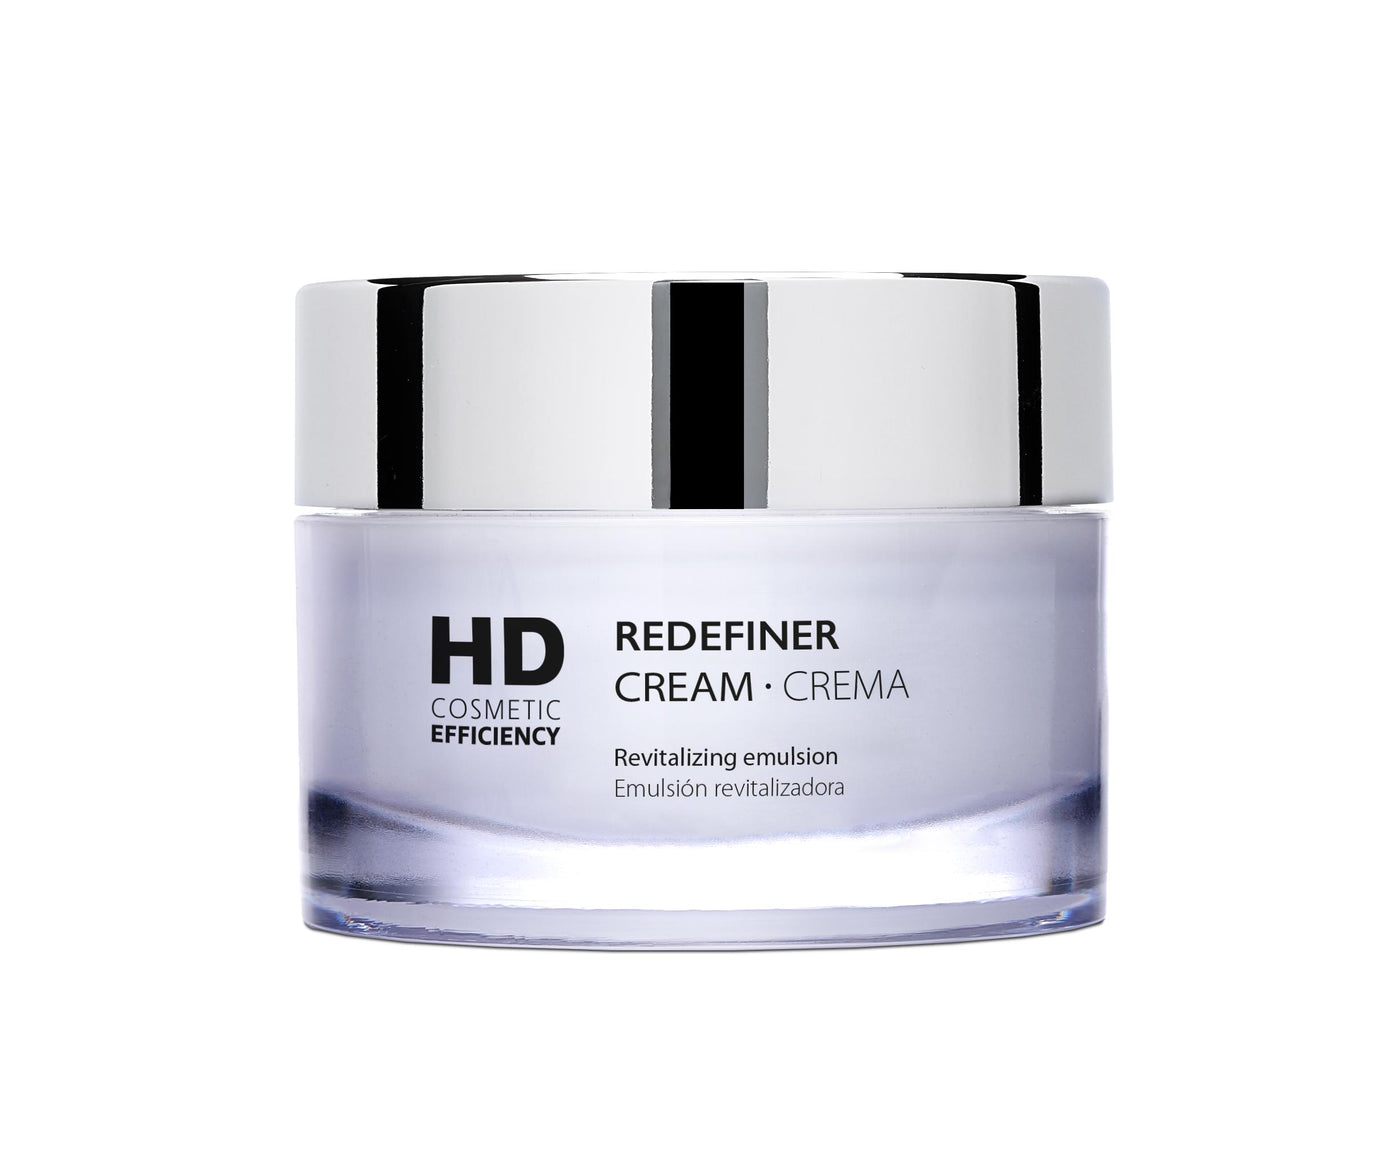 HD COSMETIC REDEFINER CREMA 50 ML | The Glow Shop